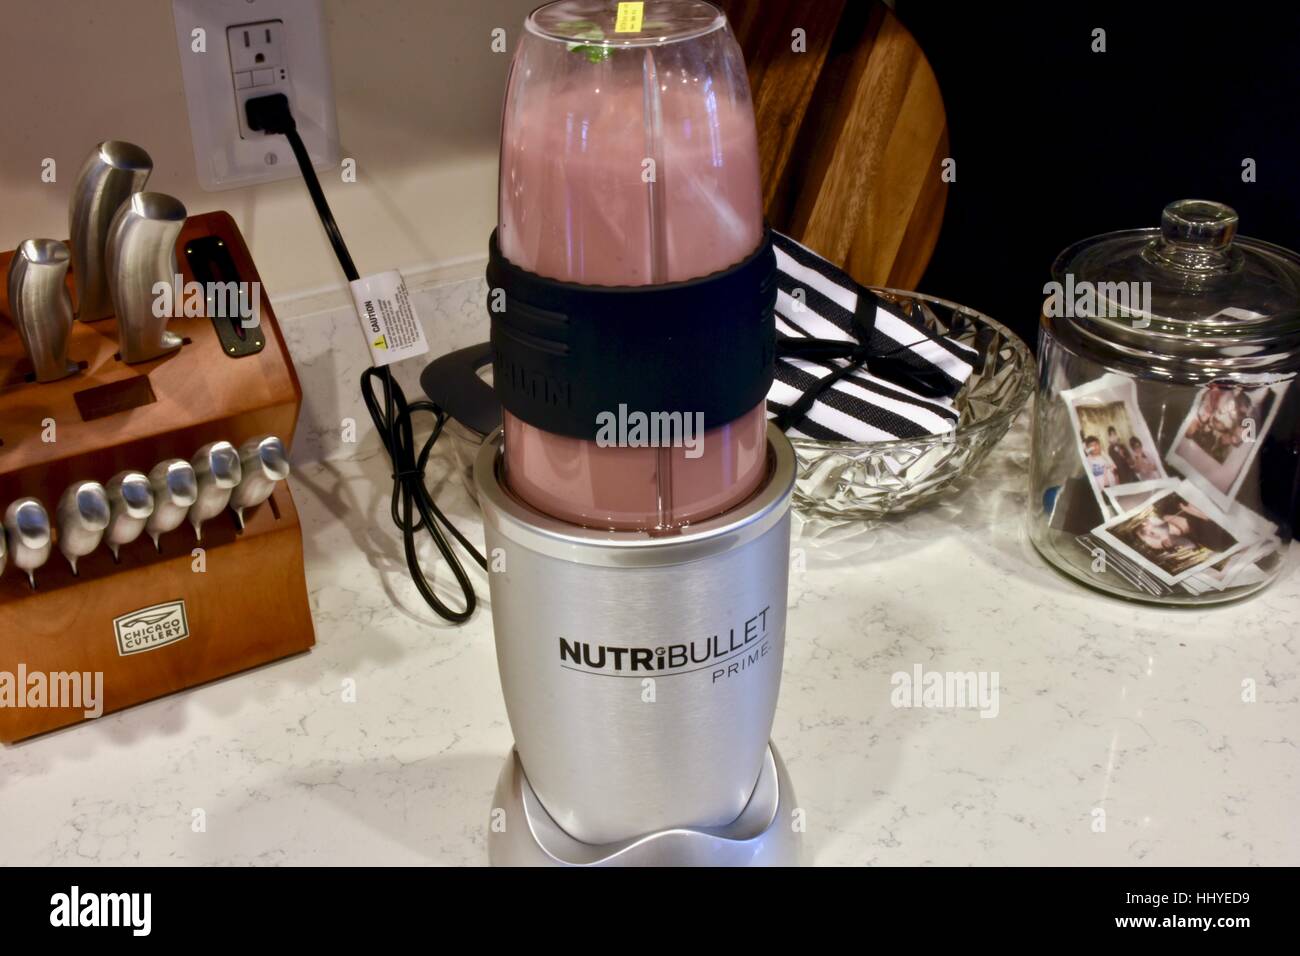 https://c8.alamy.com/comp/HHYED9/making-a-smoothie-with-the-nutribullet-blender-in-a-modern-kitchen-HHYED9.jpg